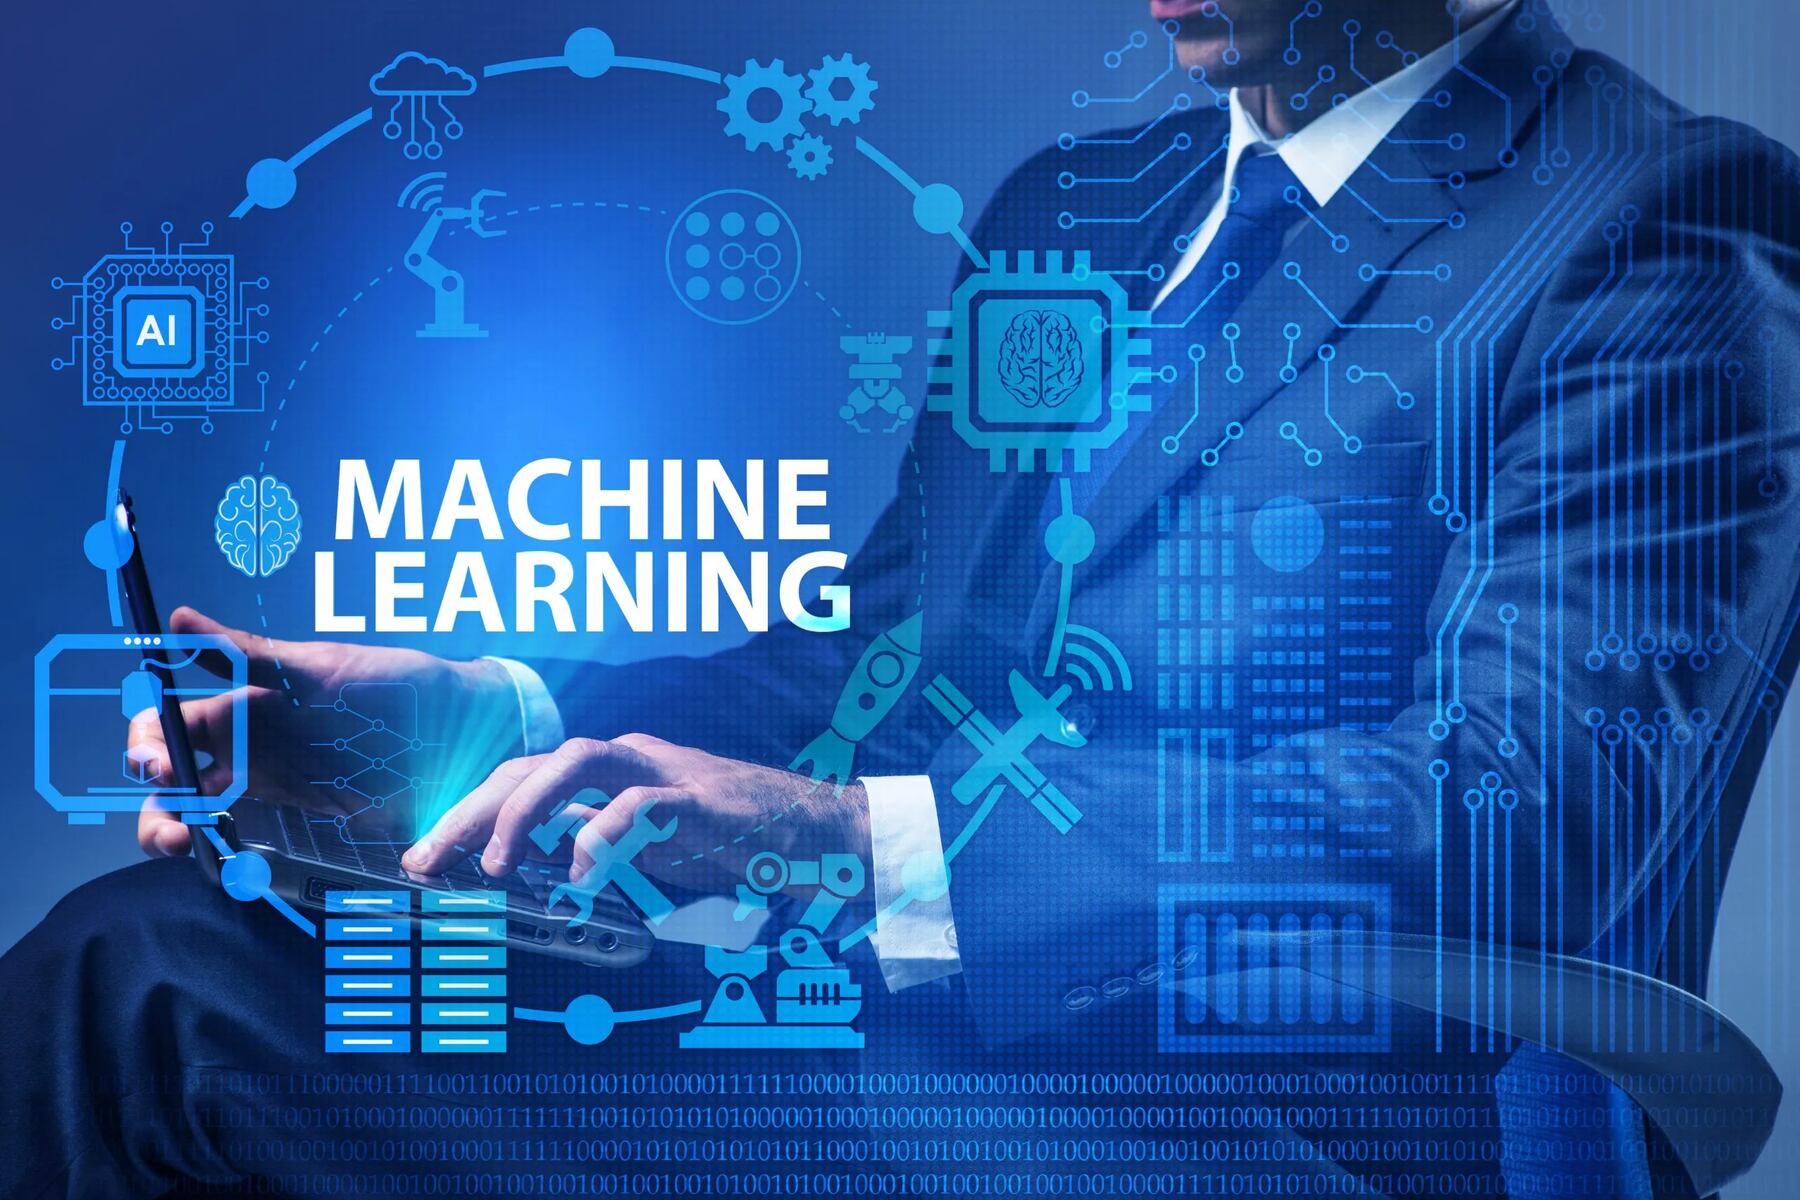 what-is-the-first-step-when-adding-a-machine-learning-component-to-an-existing-system